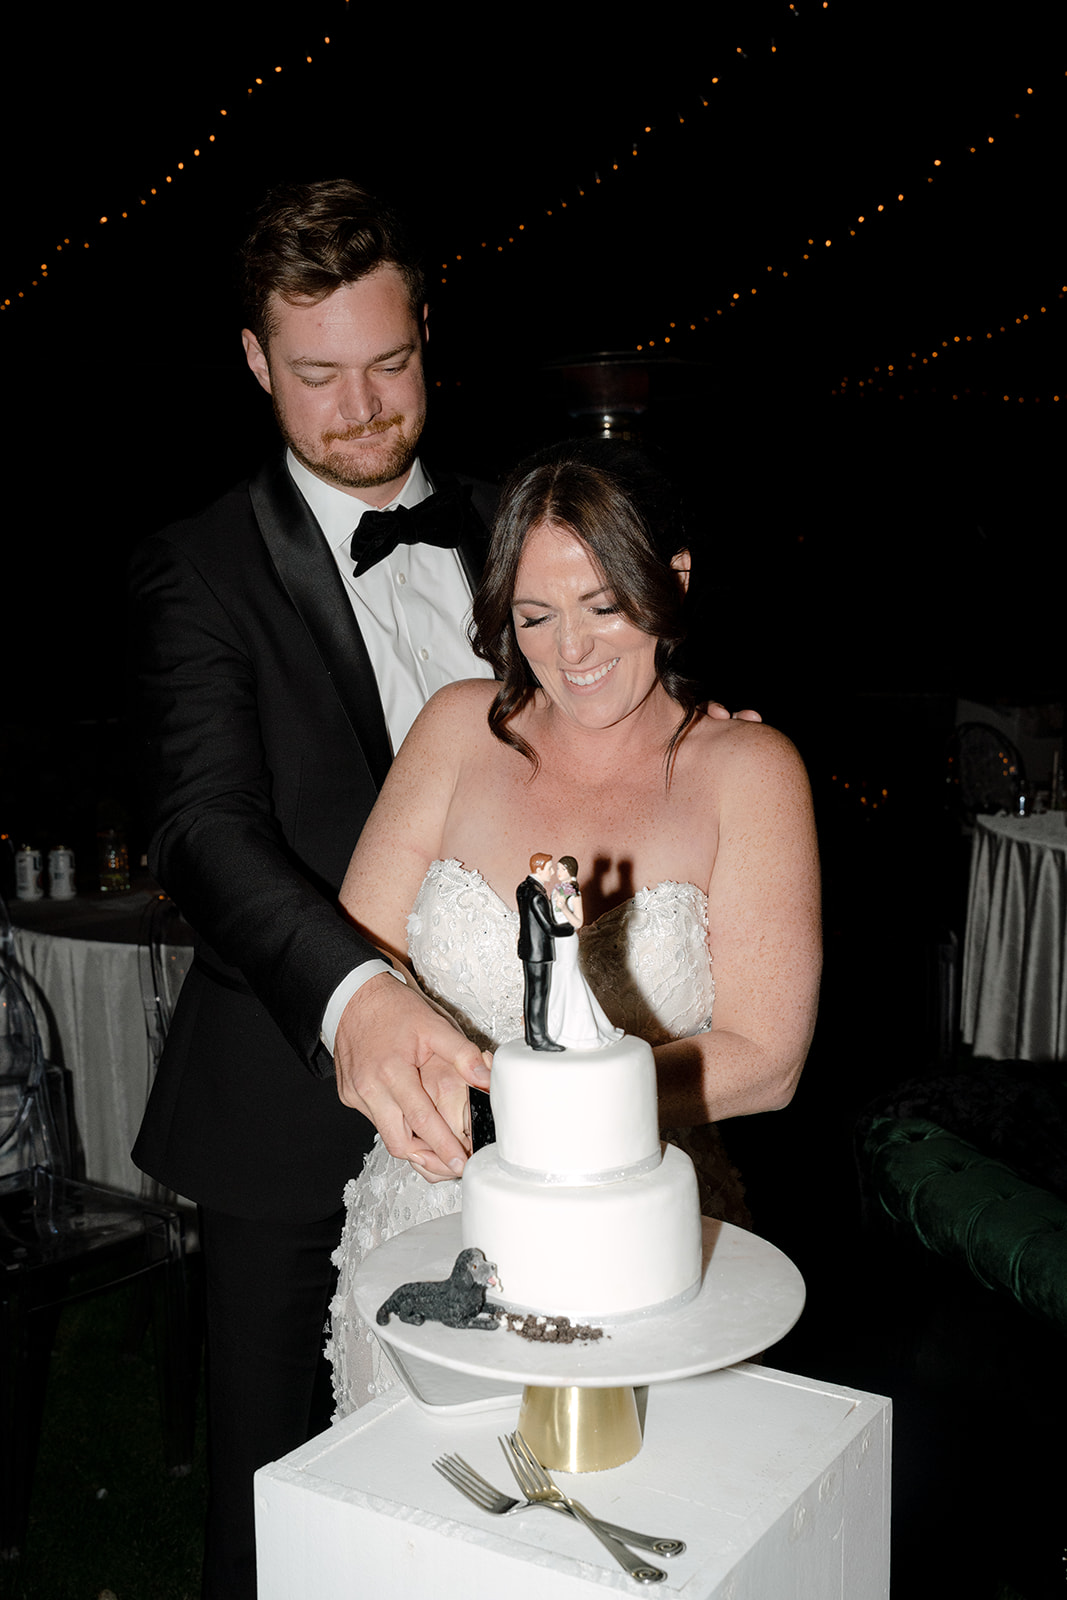 A newlywed couple cuts the cake at their wedding reception